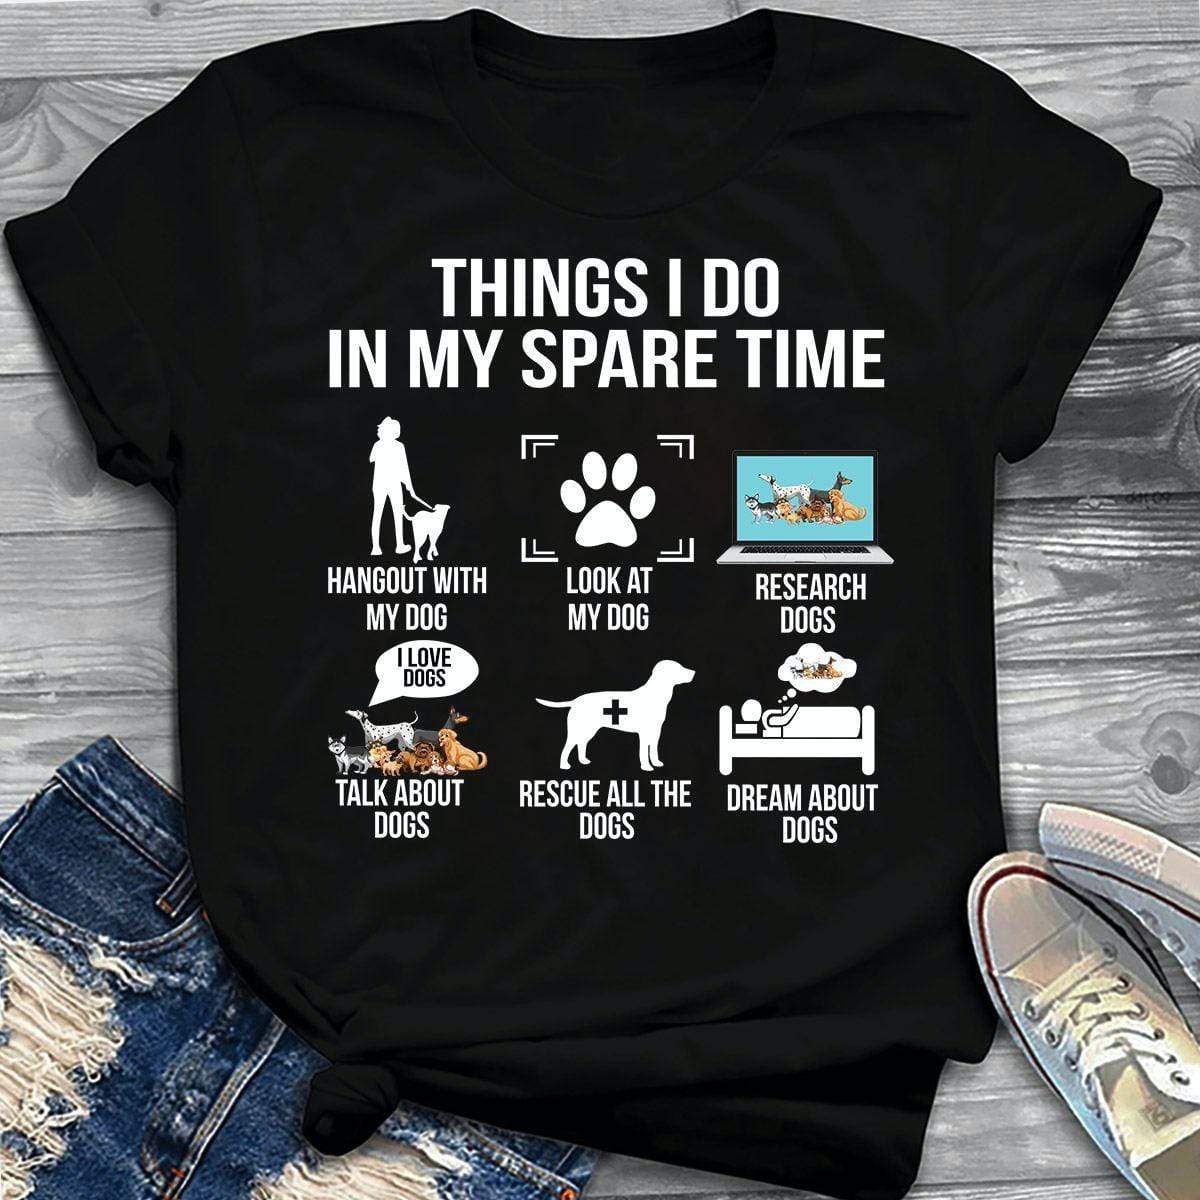 Things I Do Is My Spare Time T-Shirt